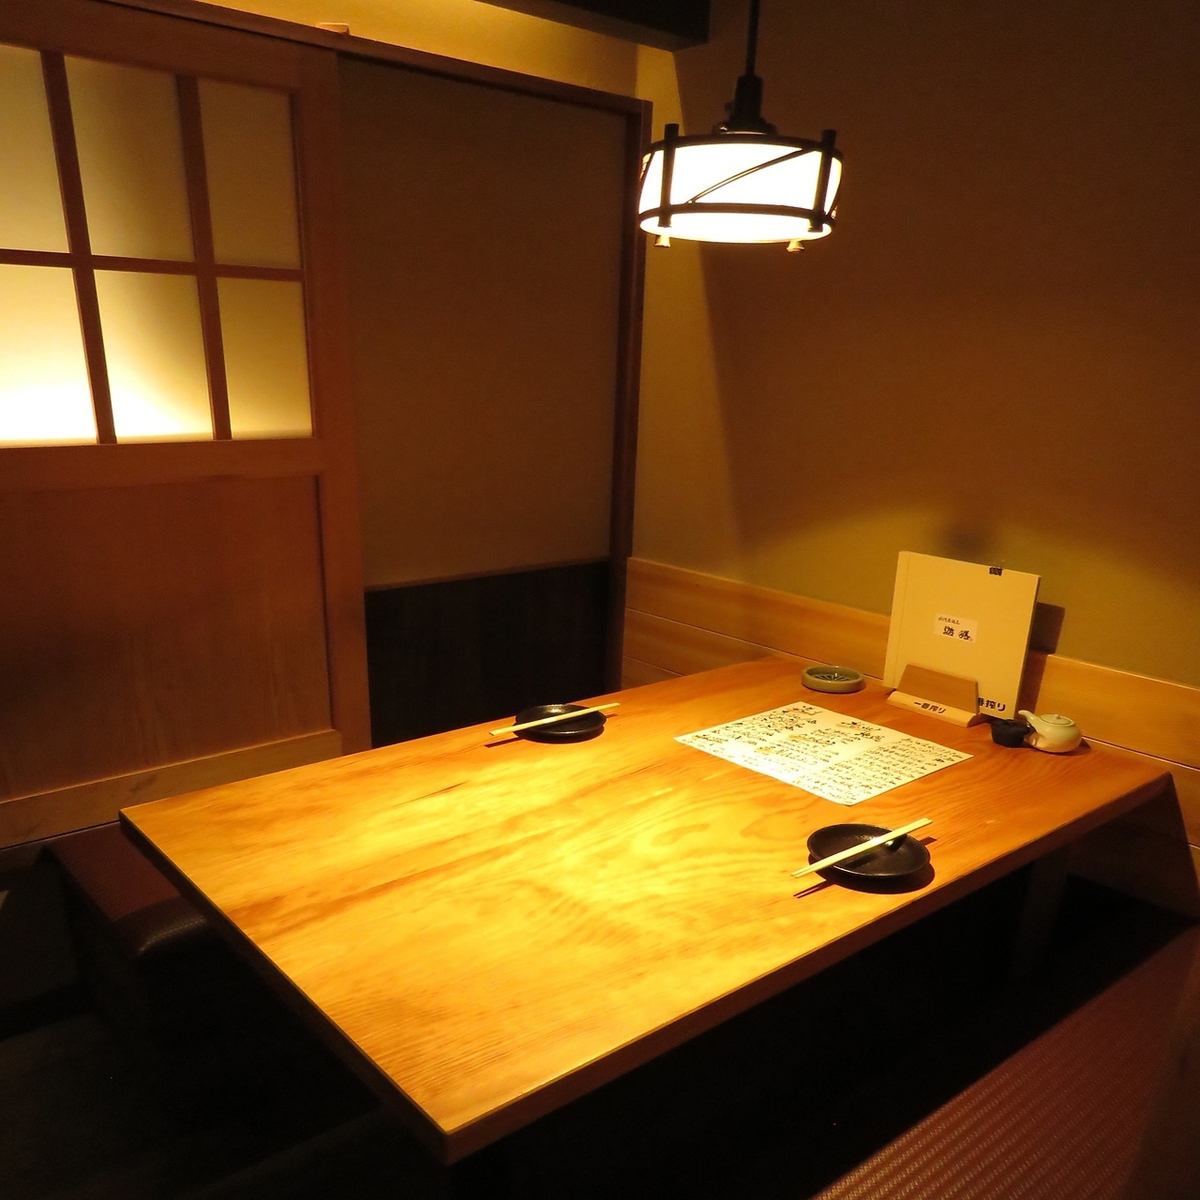 Spend time just the two of you without worrying about your surroundings at a relaxing private room-style table seat...♪